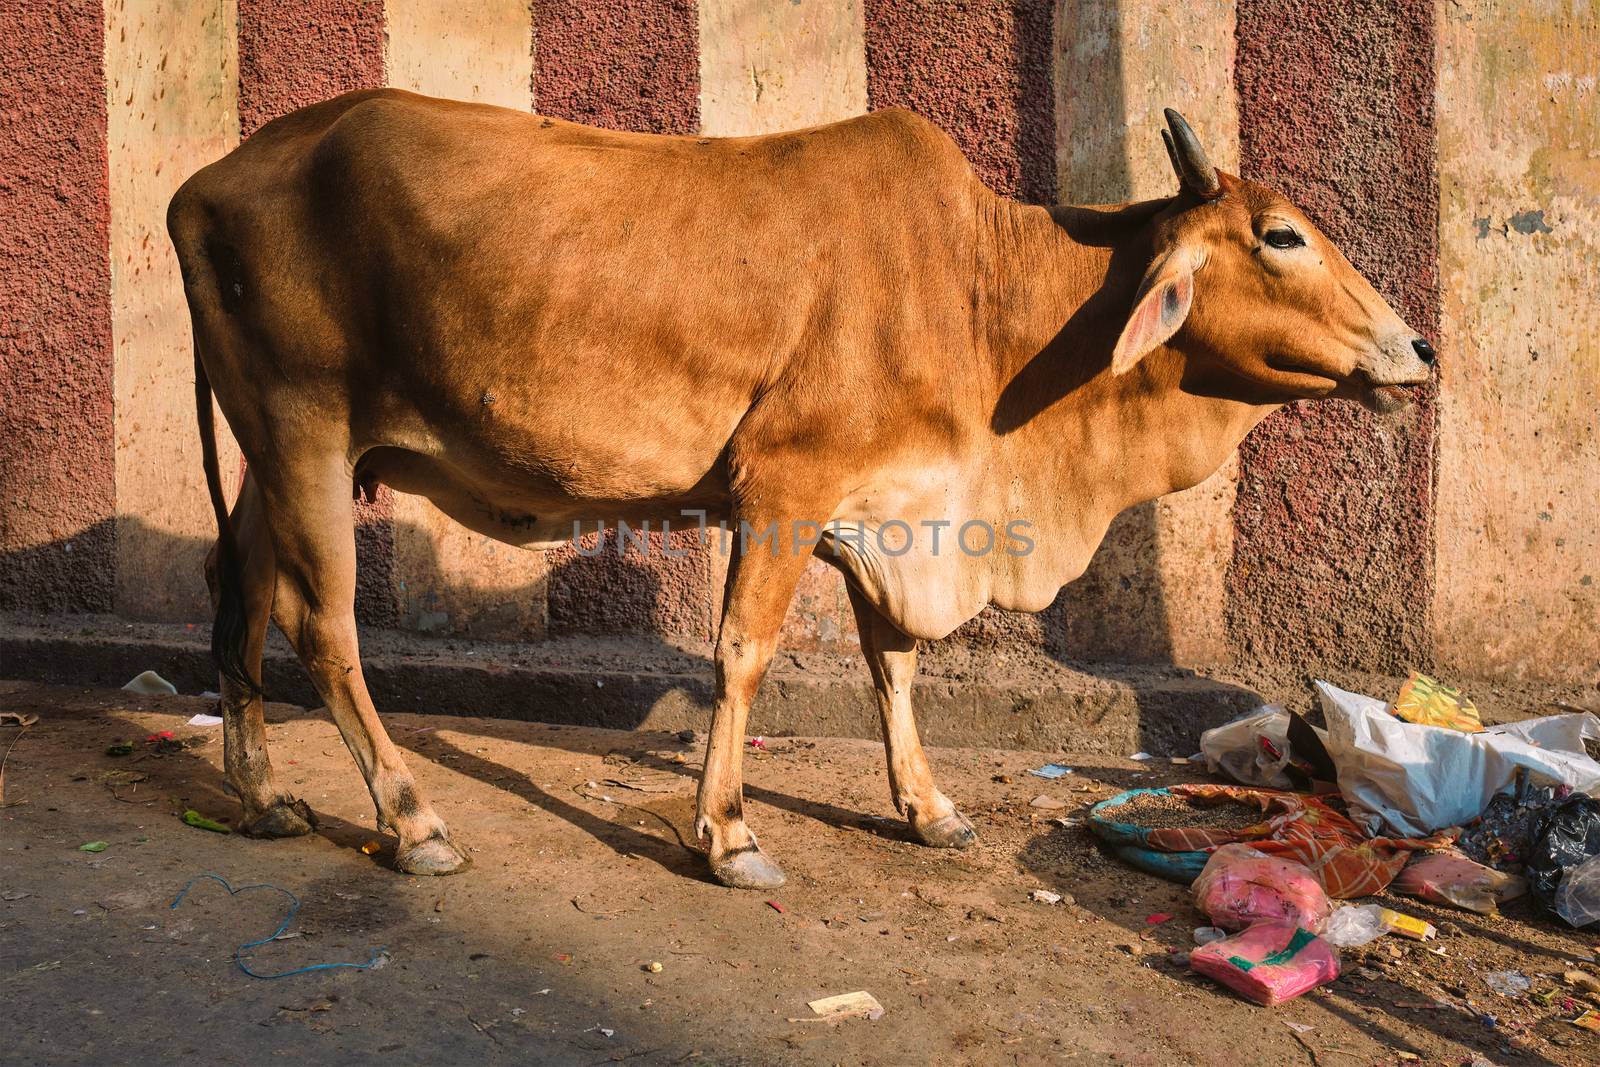 Cow in the street of India by dimol